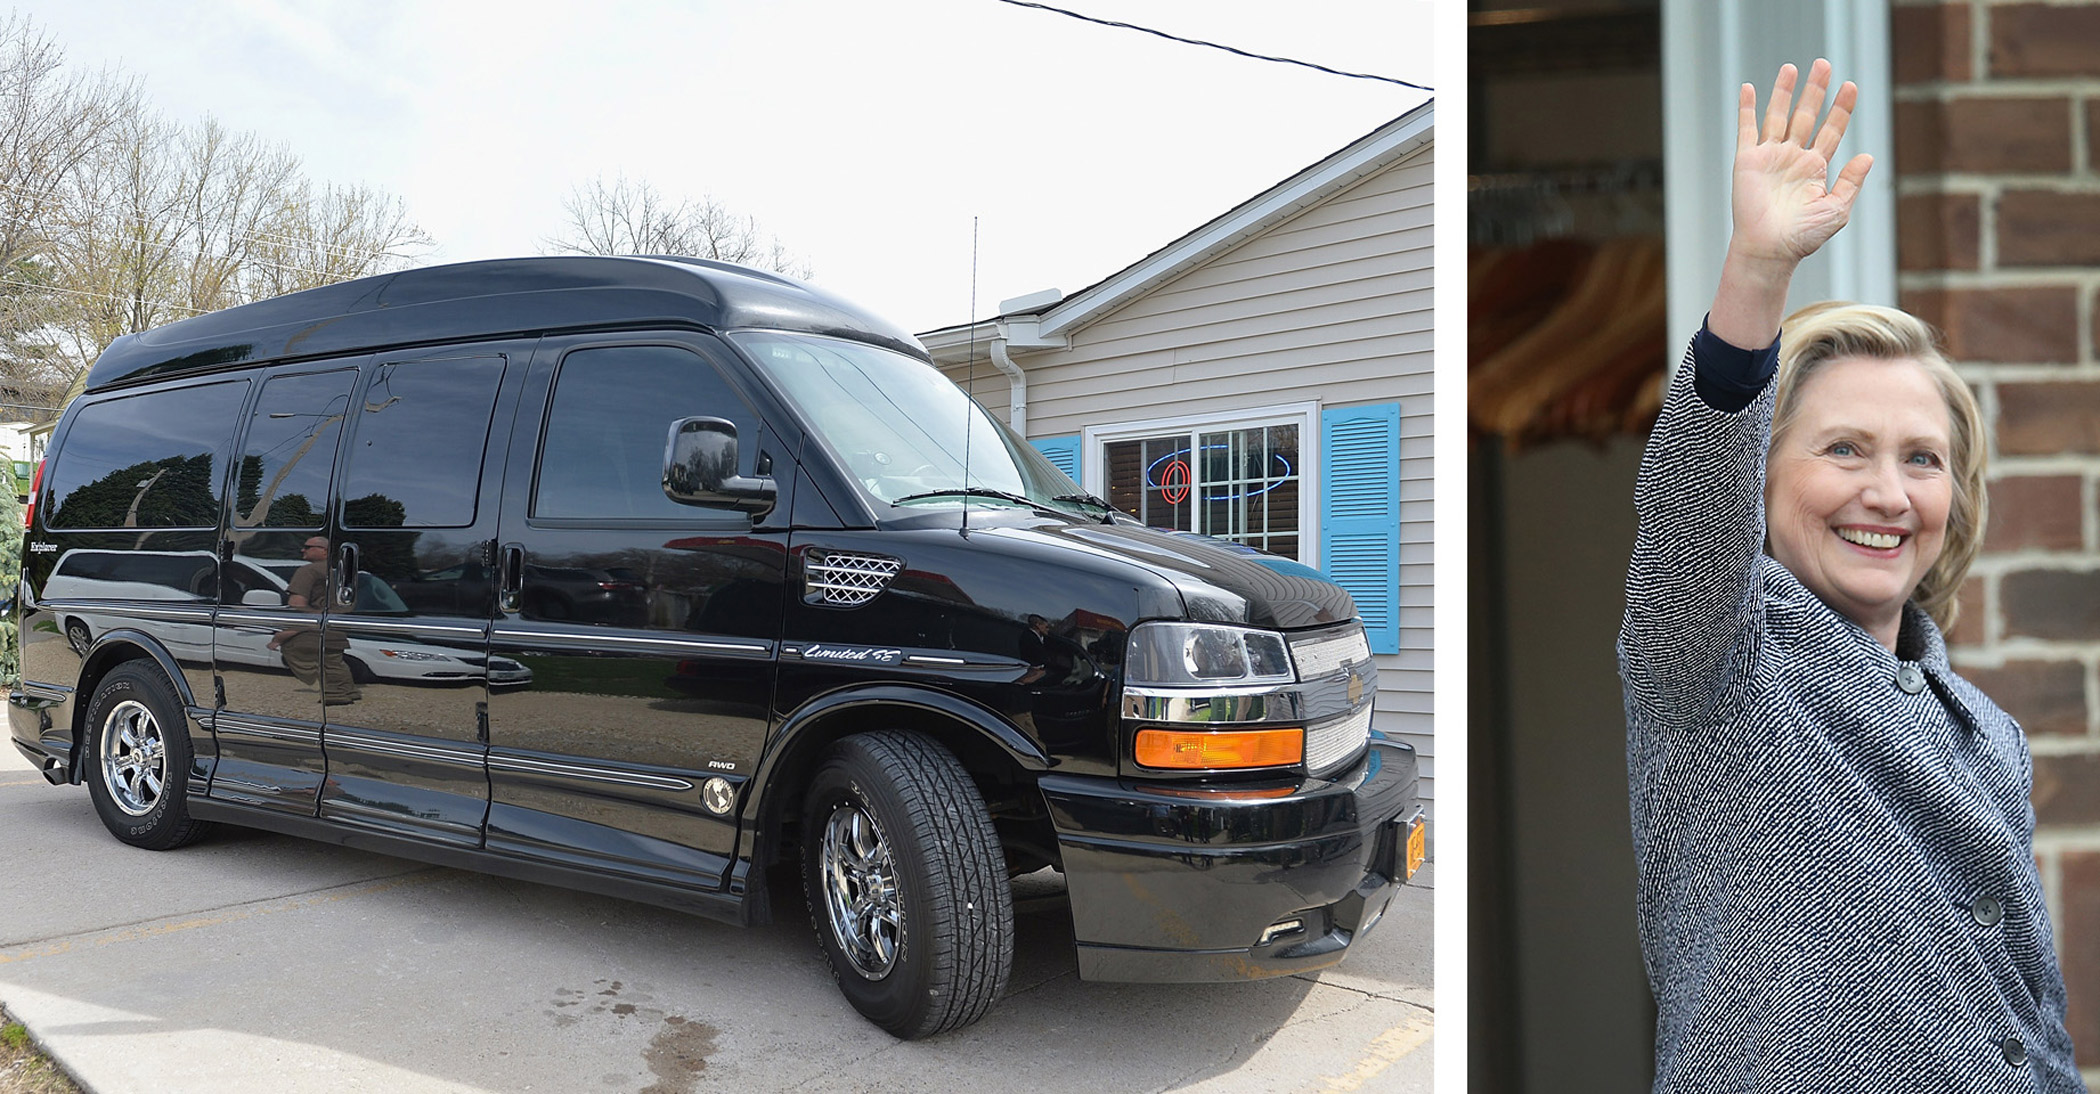 Democratic presidential candidate Hillary Clinton's van, at left, is parked during a campaign visit on April 14, 2015 in Le Claire, Iowa. Clinton, at right, waves after an even on May 18, 2015 in Mason City, Iowa.